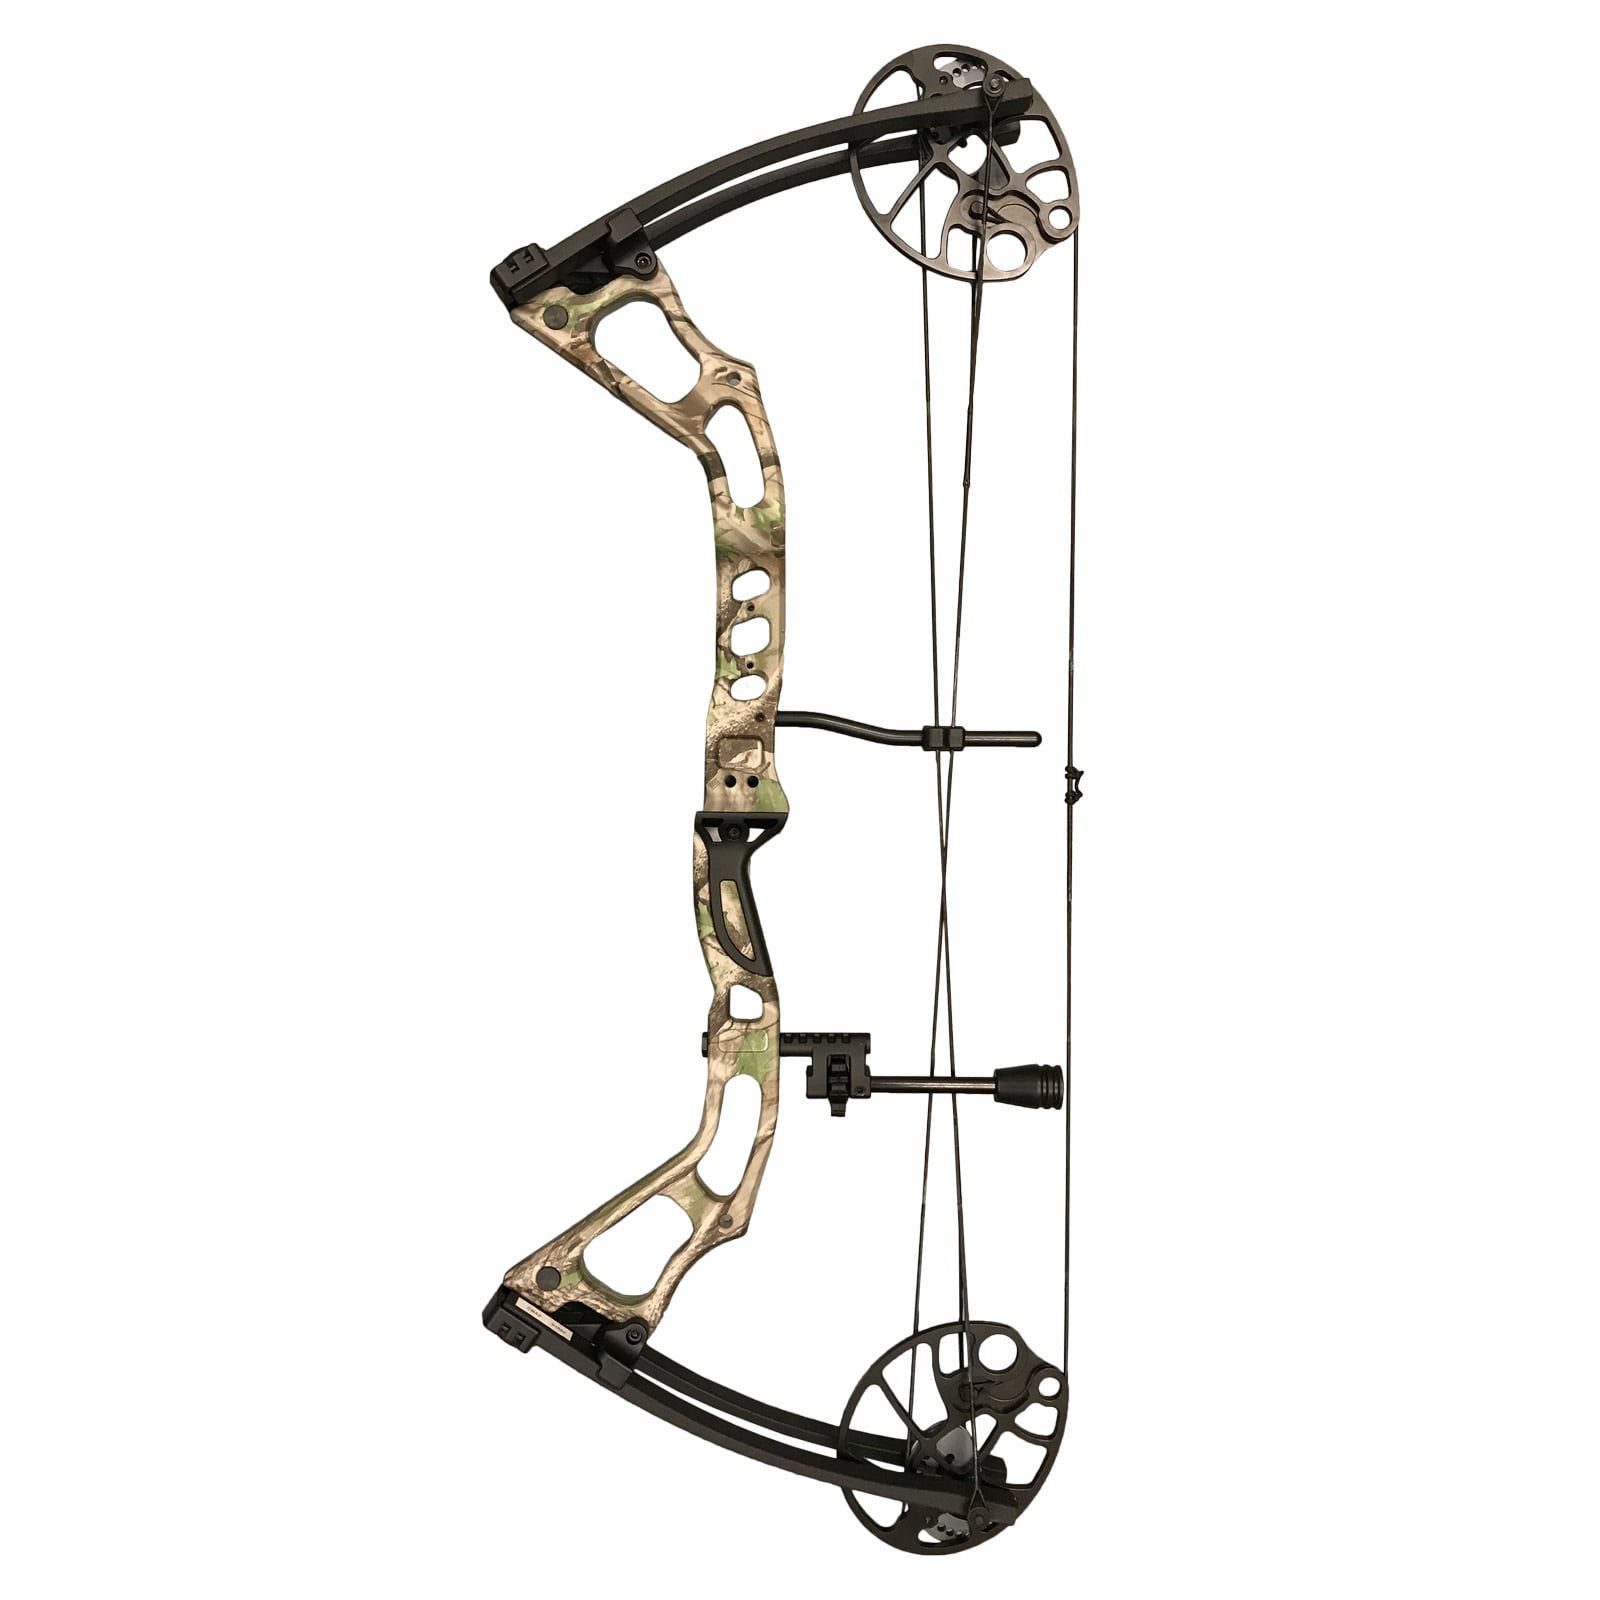 Compound Bow M1 Package Special Design for Women,19”-30” Draw Length,10-50Lbs Draw Weight Weight,Hunting Bow for Girls,Whole Muddygirl Color 